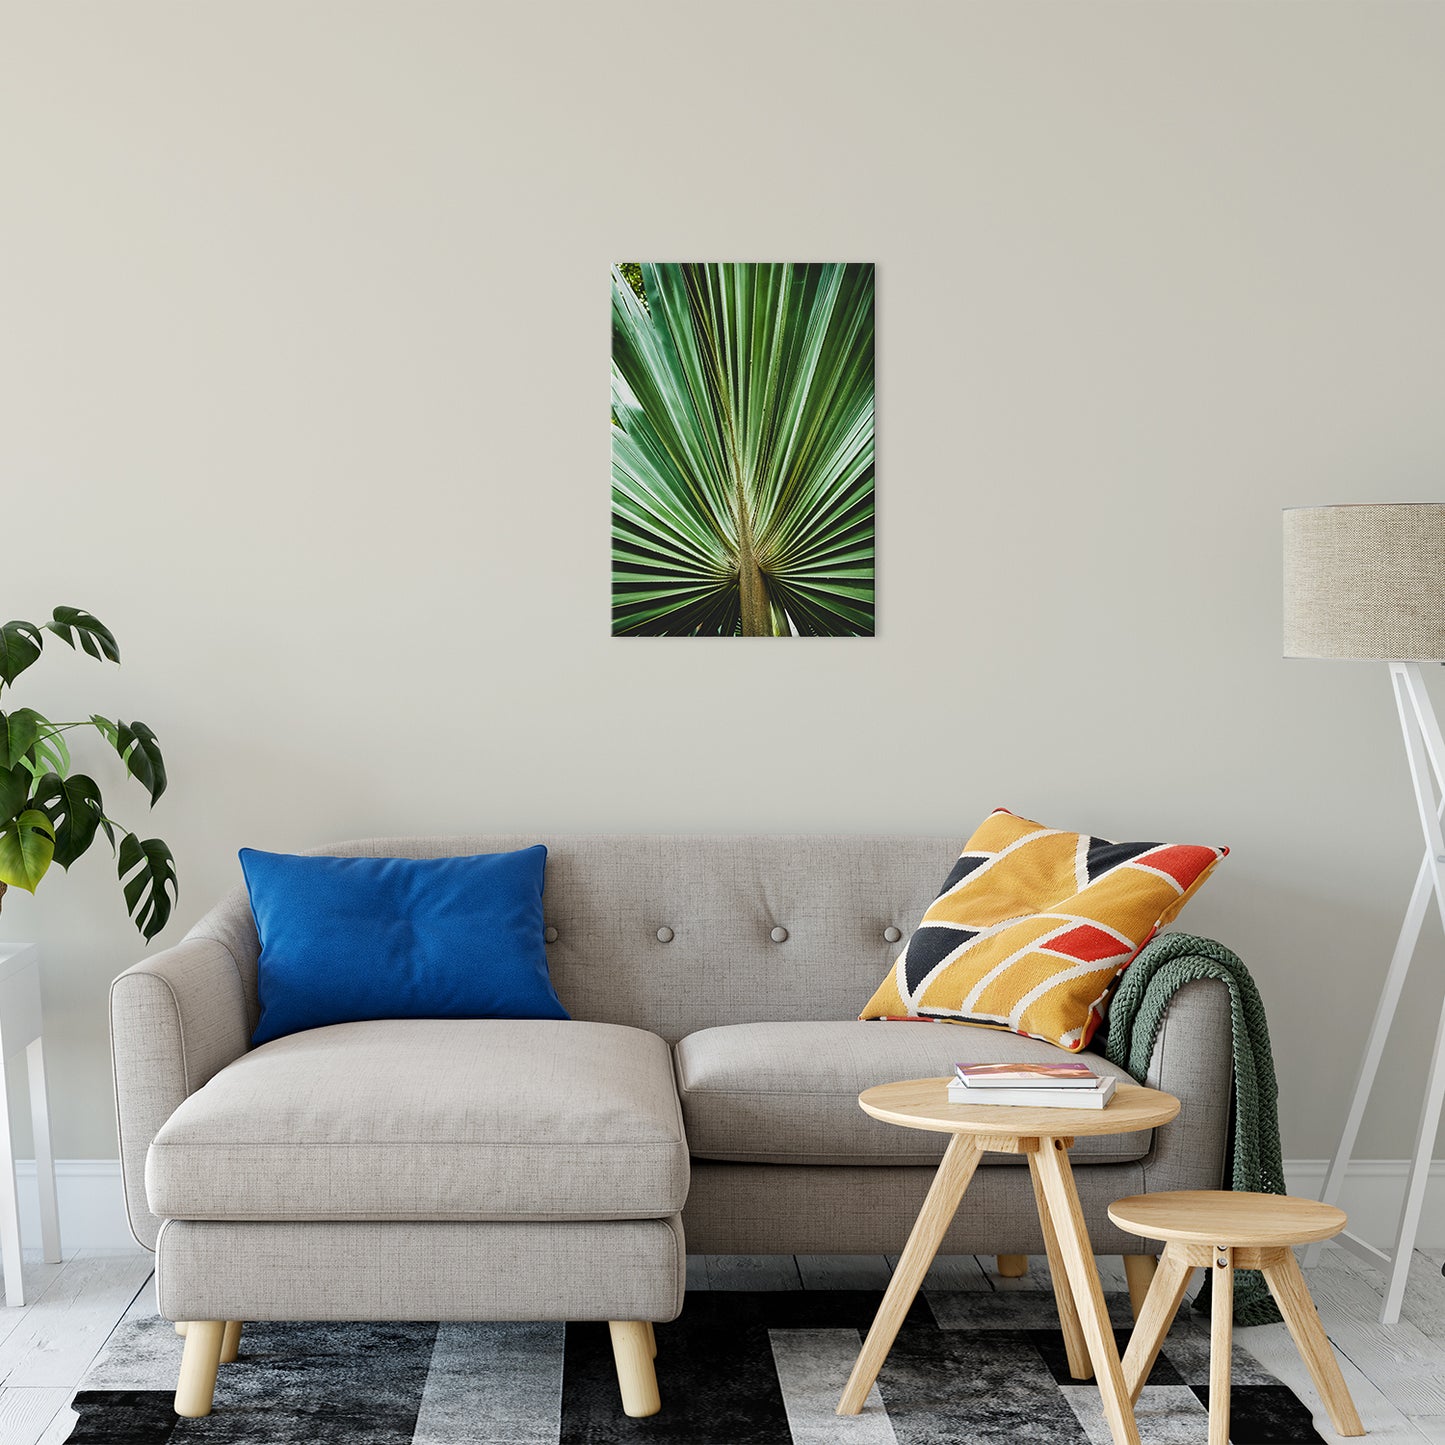 Abstract Leaf Wall Art: Aged & Colorized Wide Palm Leaves 2 Nature / Botanical Photo Fine Art Canvas Wall Art Prints 20" x 24" - PIPAFINEART